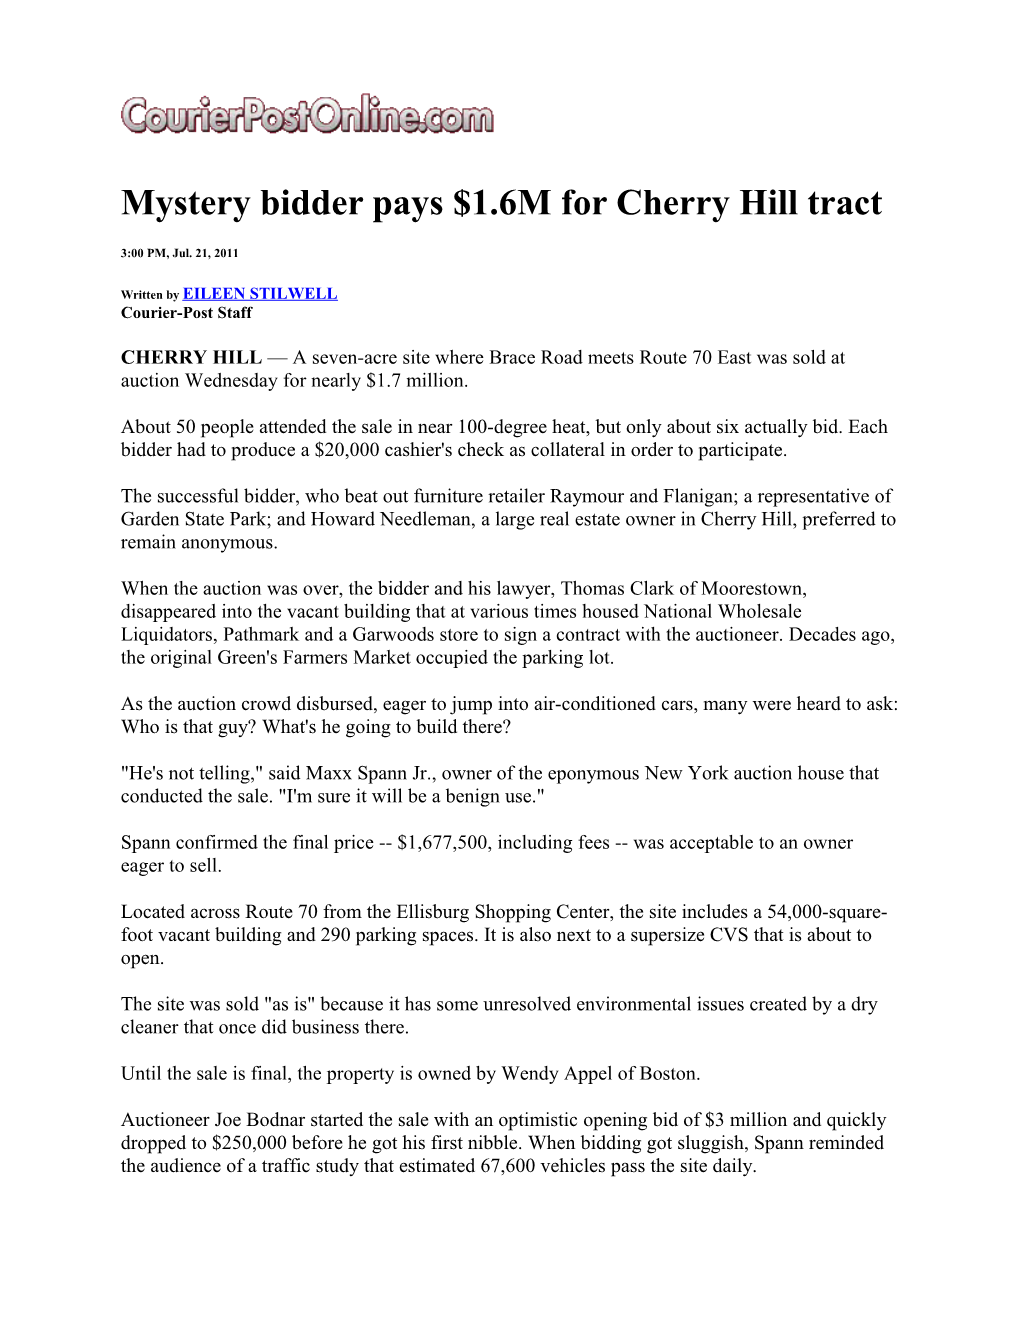 Mystery Bidder Pays $1.6M for Cherry Hill Tract